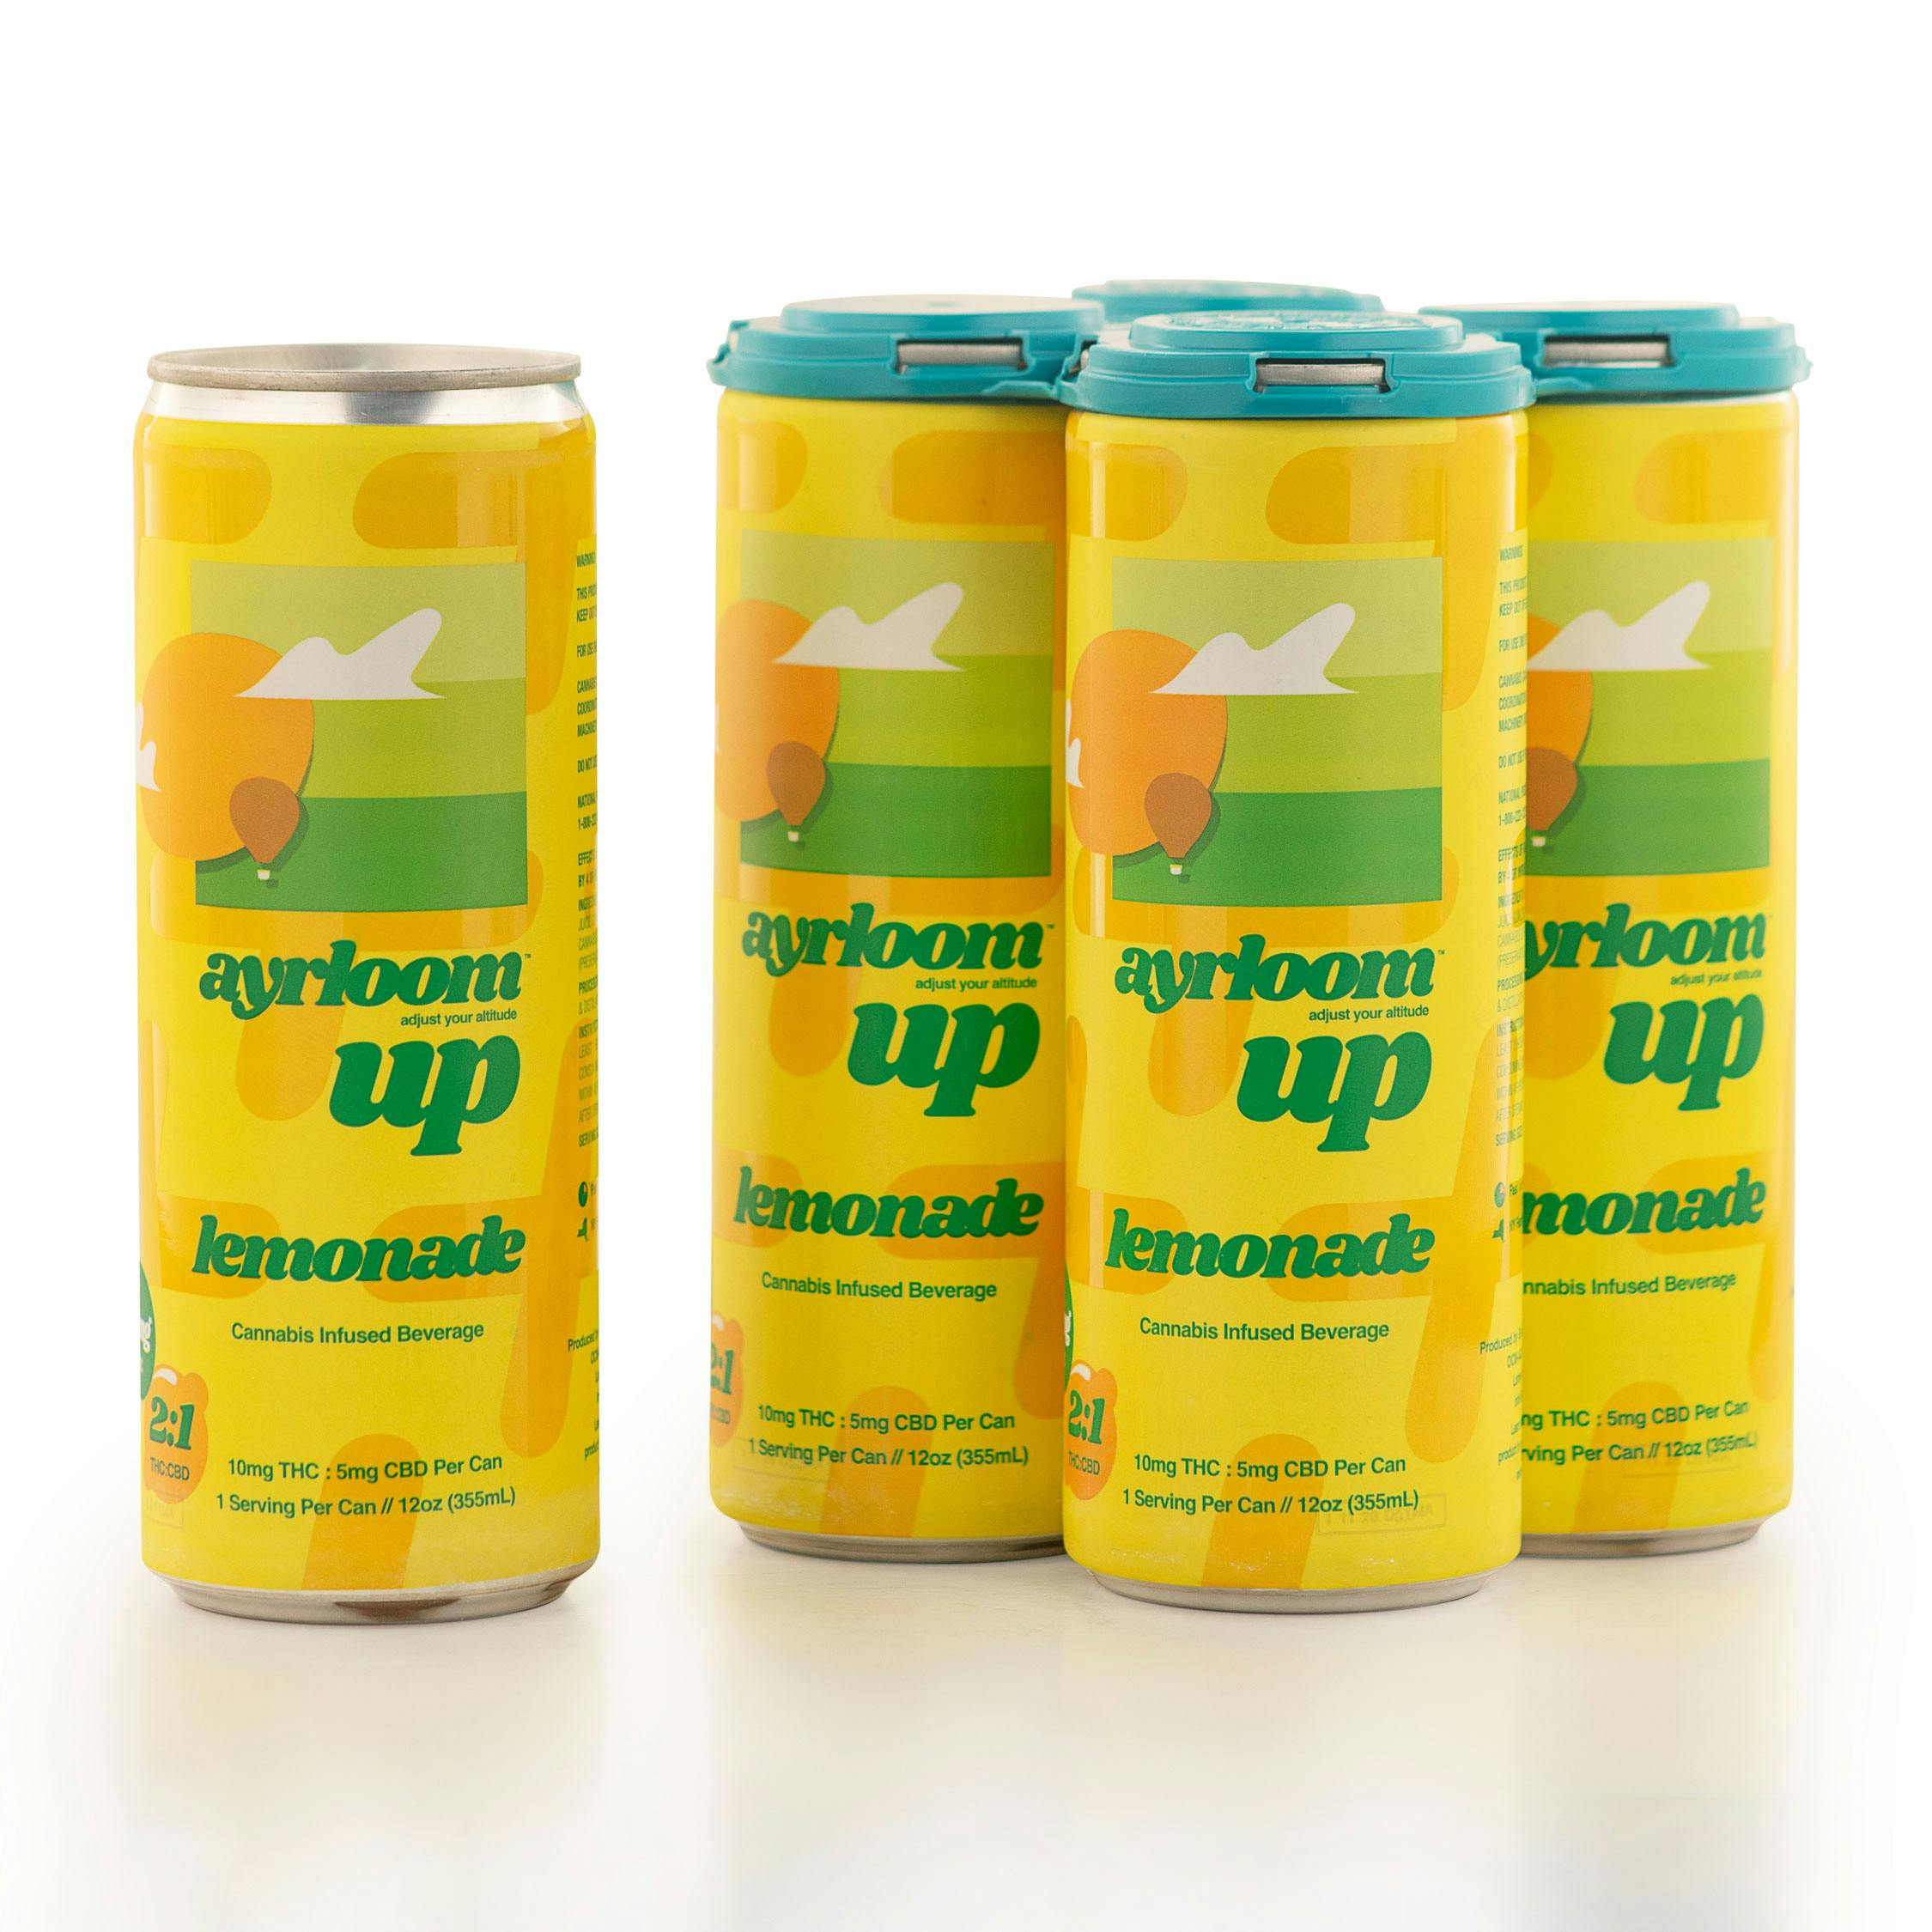 Lemonade 2:1 Infused Beverage • 4 Pack - ayrloom - EDIBLES - Rockland County Weed Delivery | Treehouse Cannabis